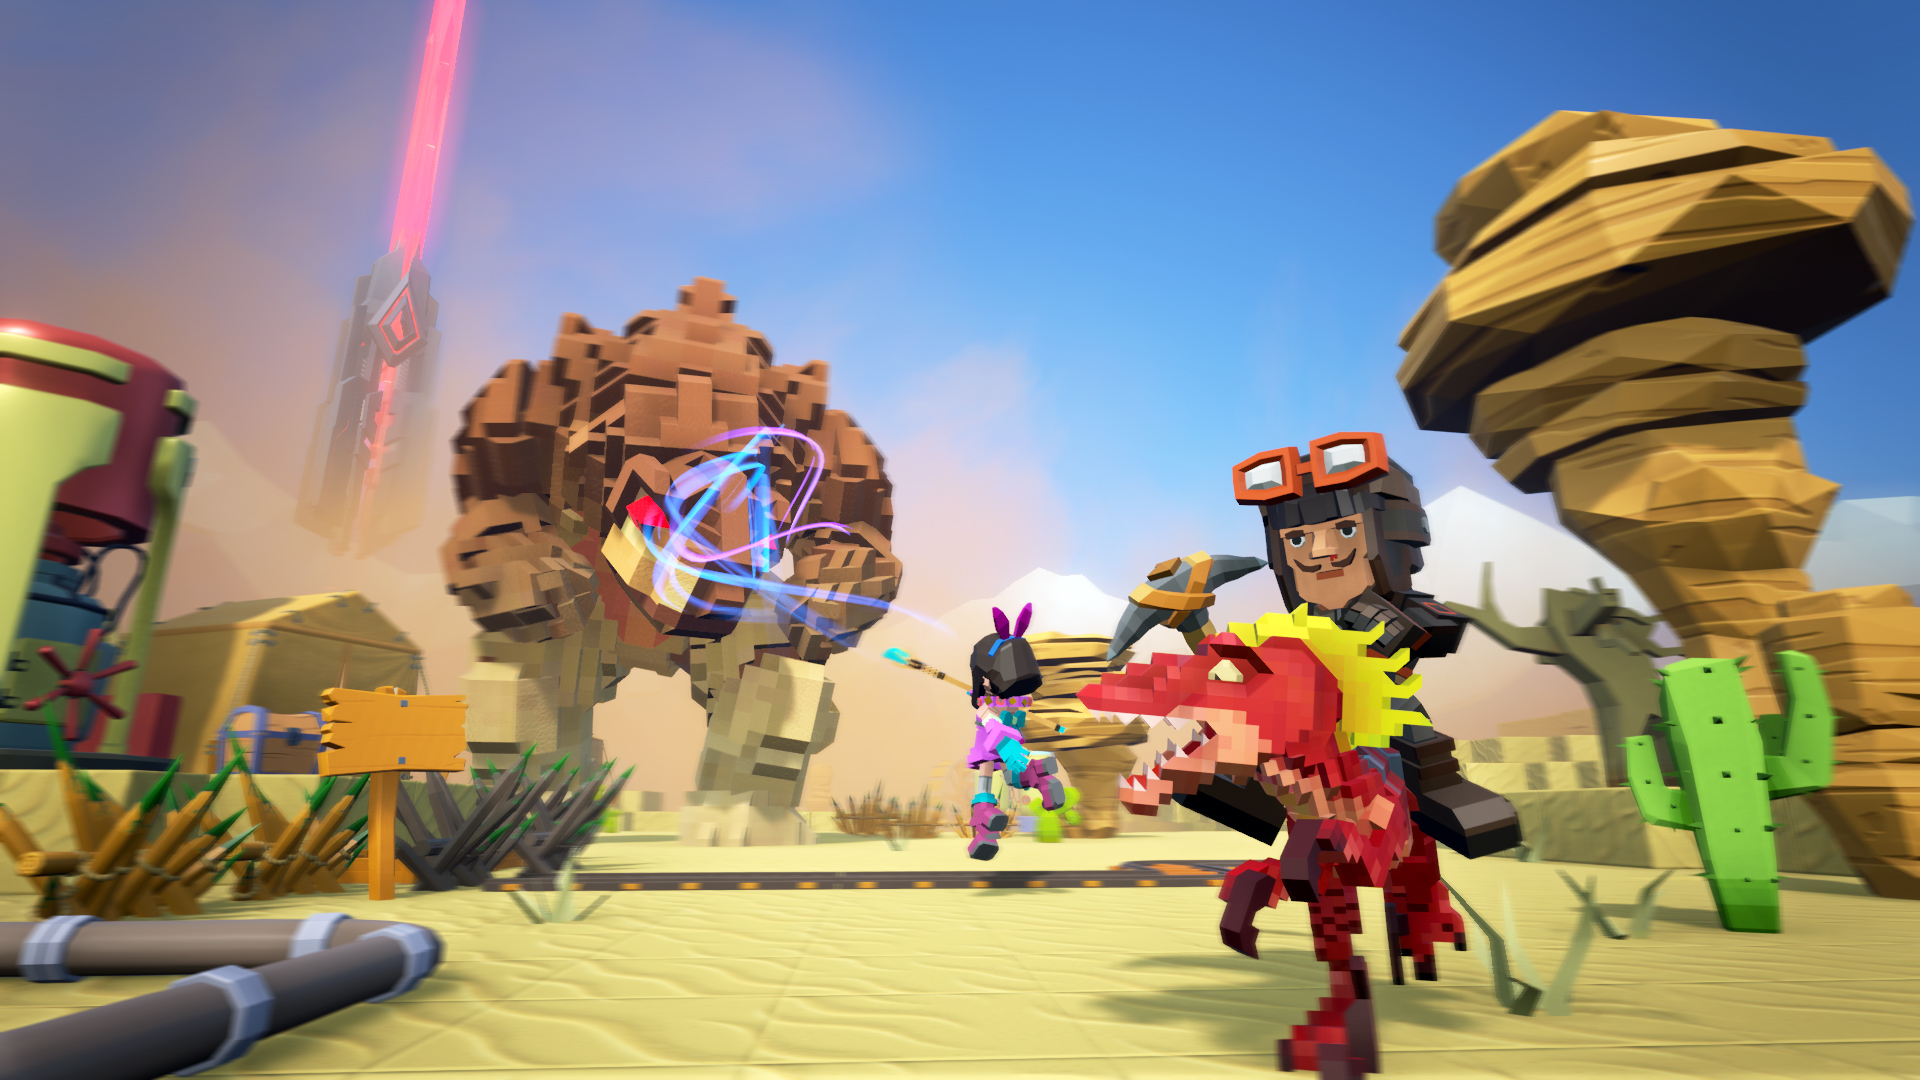 a character rides on a red creature with blonde hair while another engages in battle in PixARK